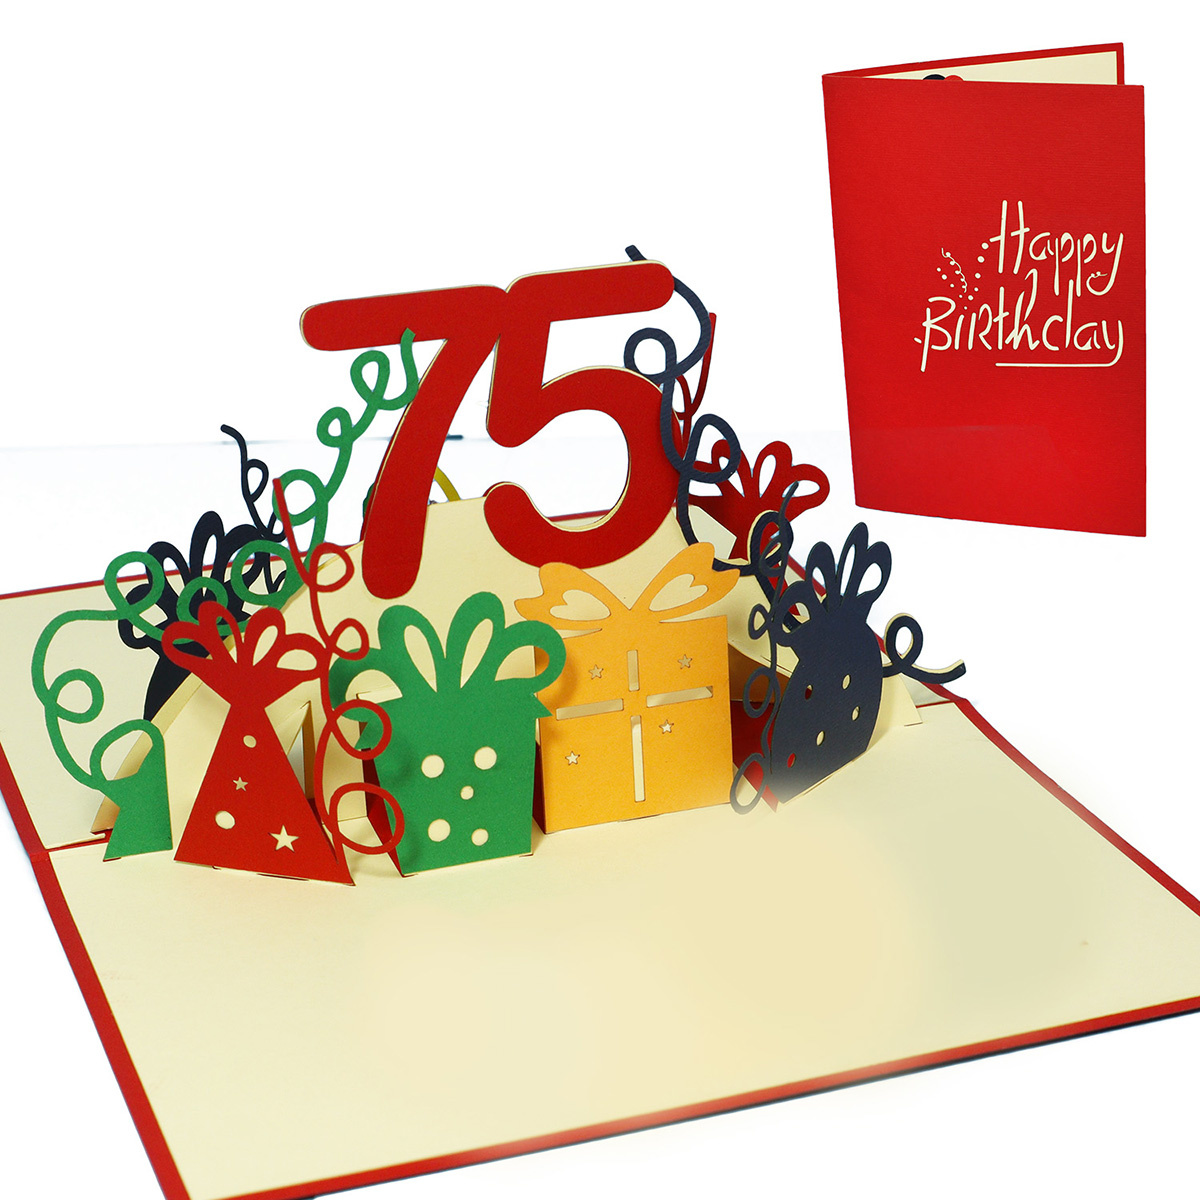 LINPOPUP LIN17347, LINPopUp®, Pop Up 3D Card, Birthday Card, Greeting Card, Gift Certificate, 75th Birthday, N231